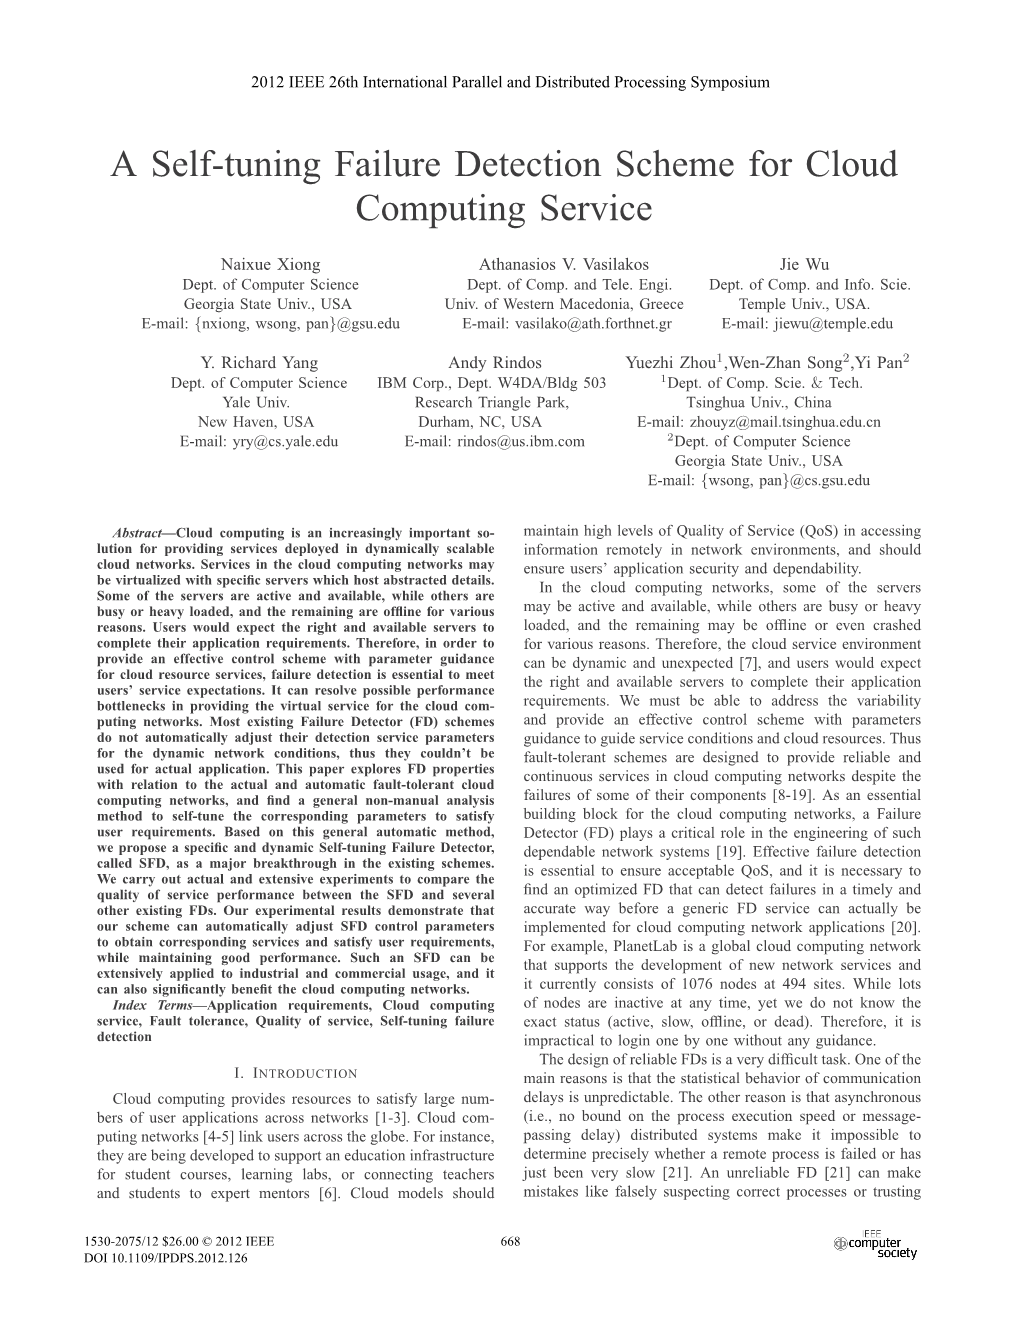 A Self-Tuning Failure Detection Scheme for Cloud Computing Service